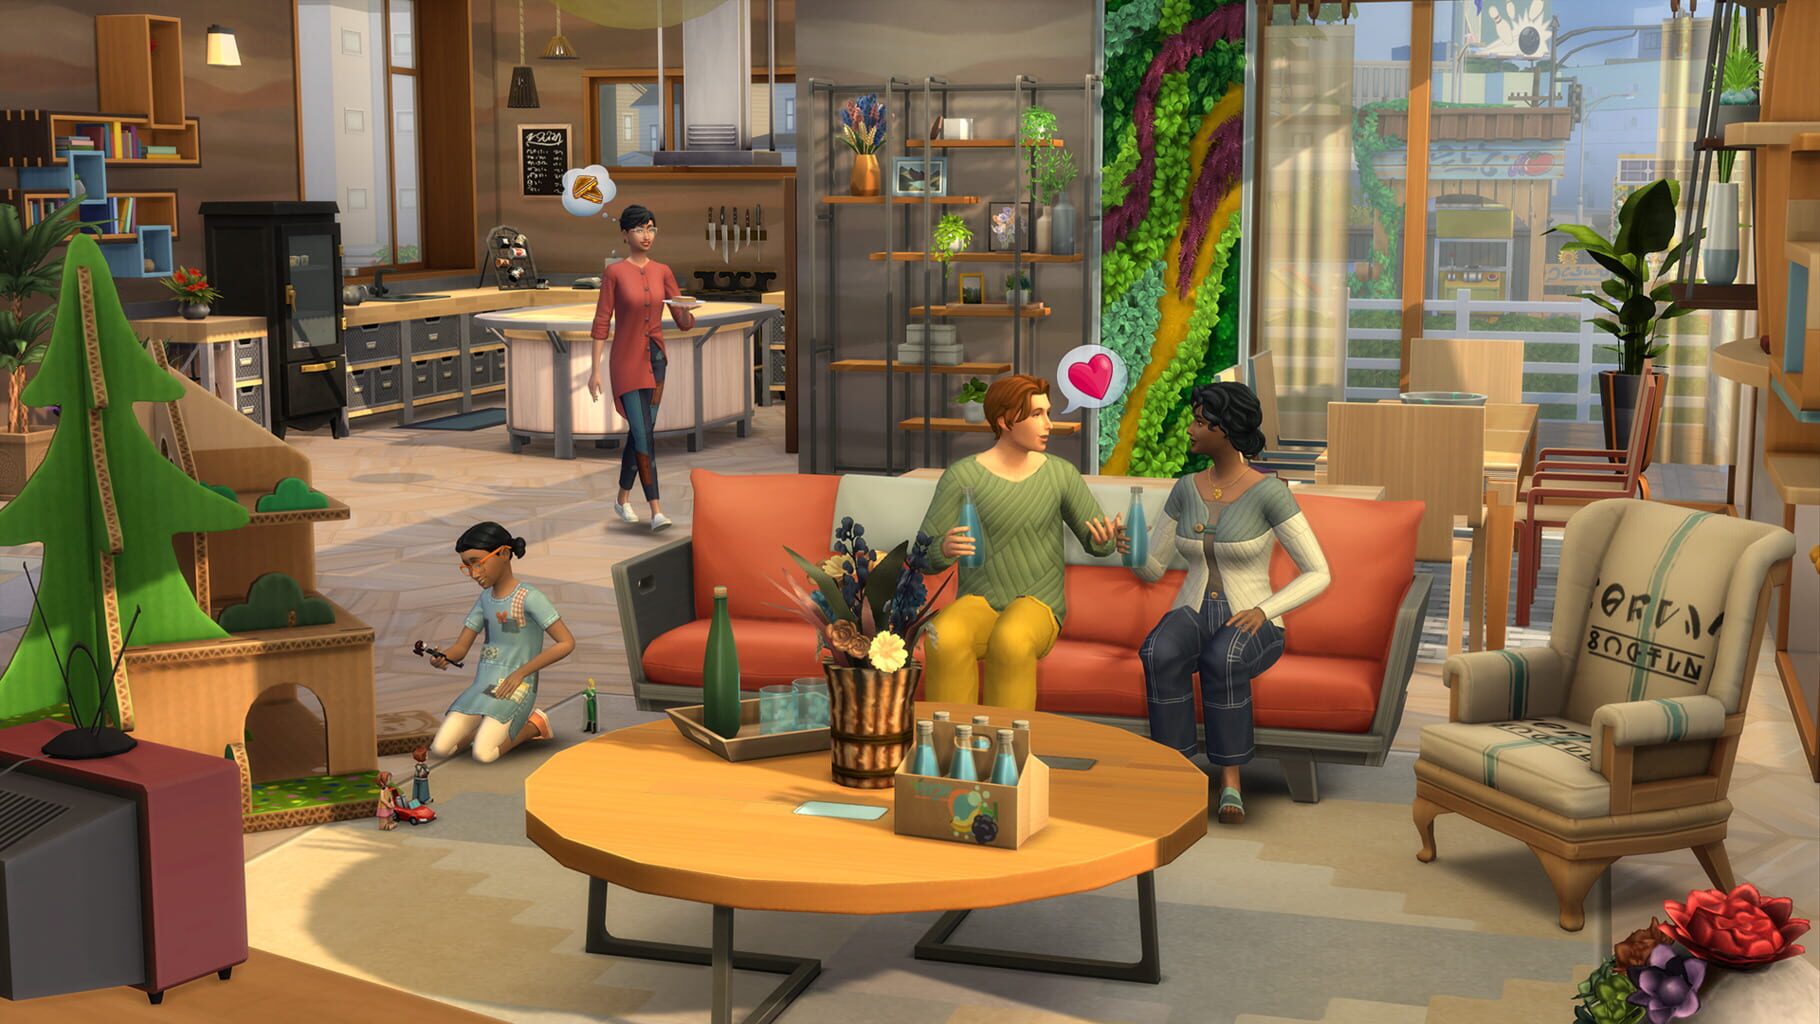 The Sims 4: Eco Lifestyle Image